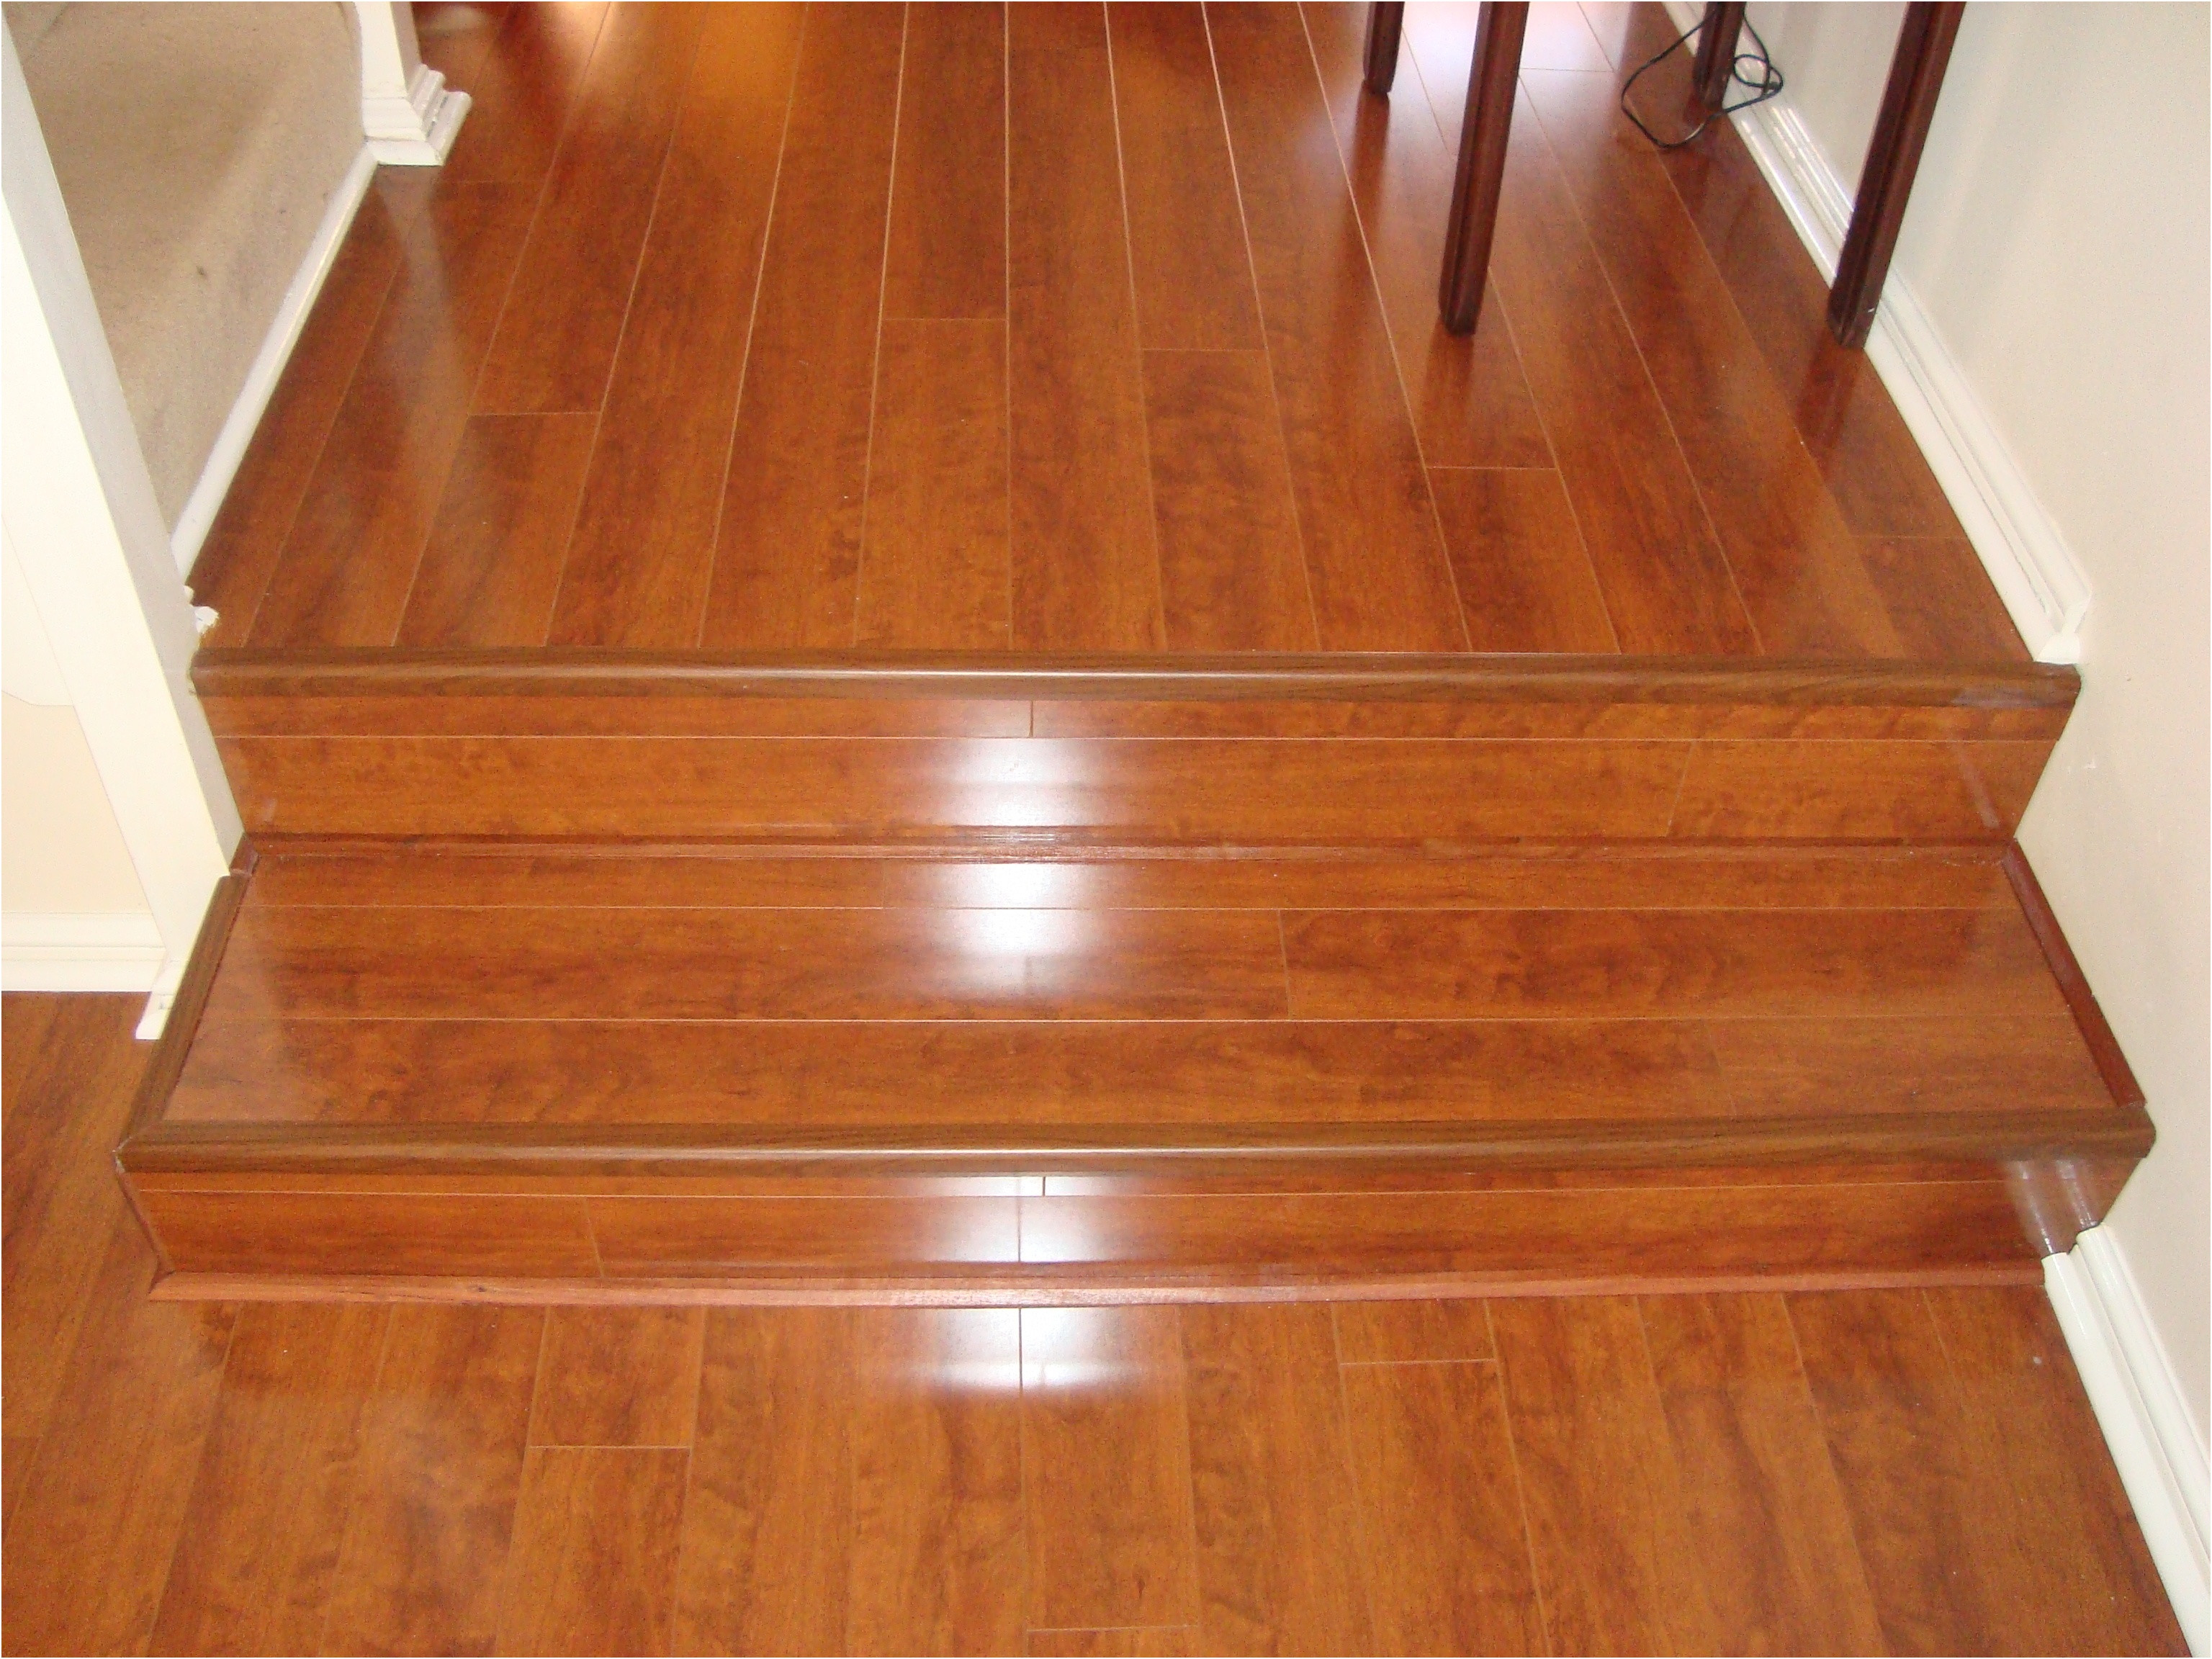 bruce hardwood laminate floor cleaner home depot of home depot hardwood flooring installation cost lovely best laminate with regard to home depot hardwood flooring installation cost lovely best laminate flooring for kitchen how thick should i